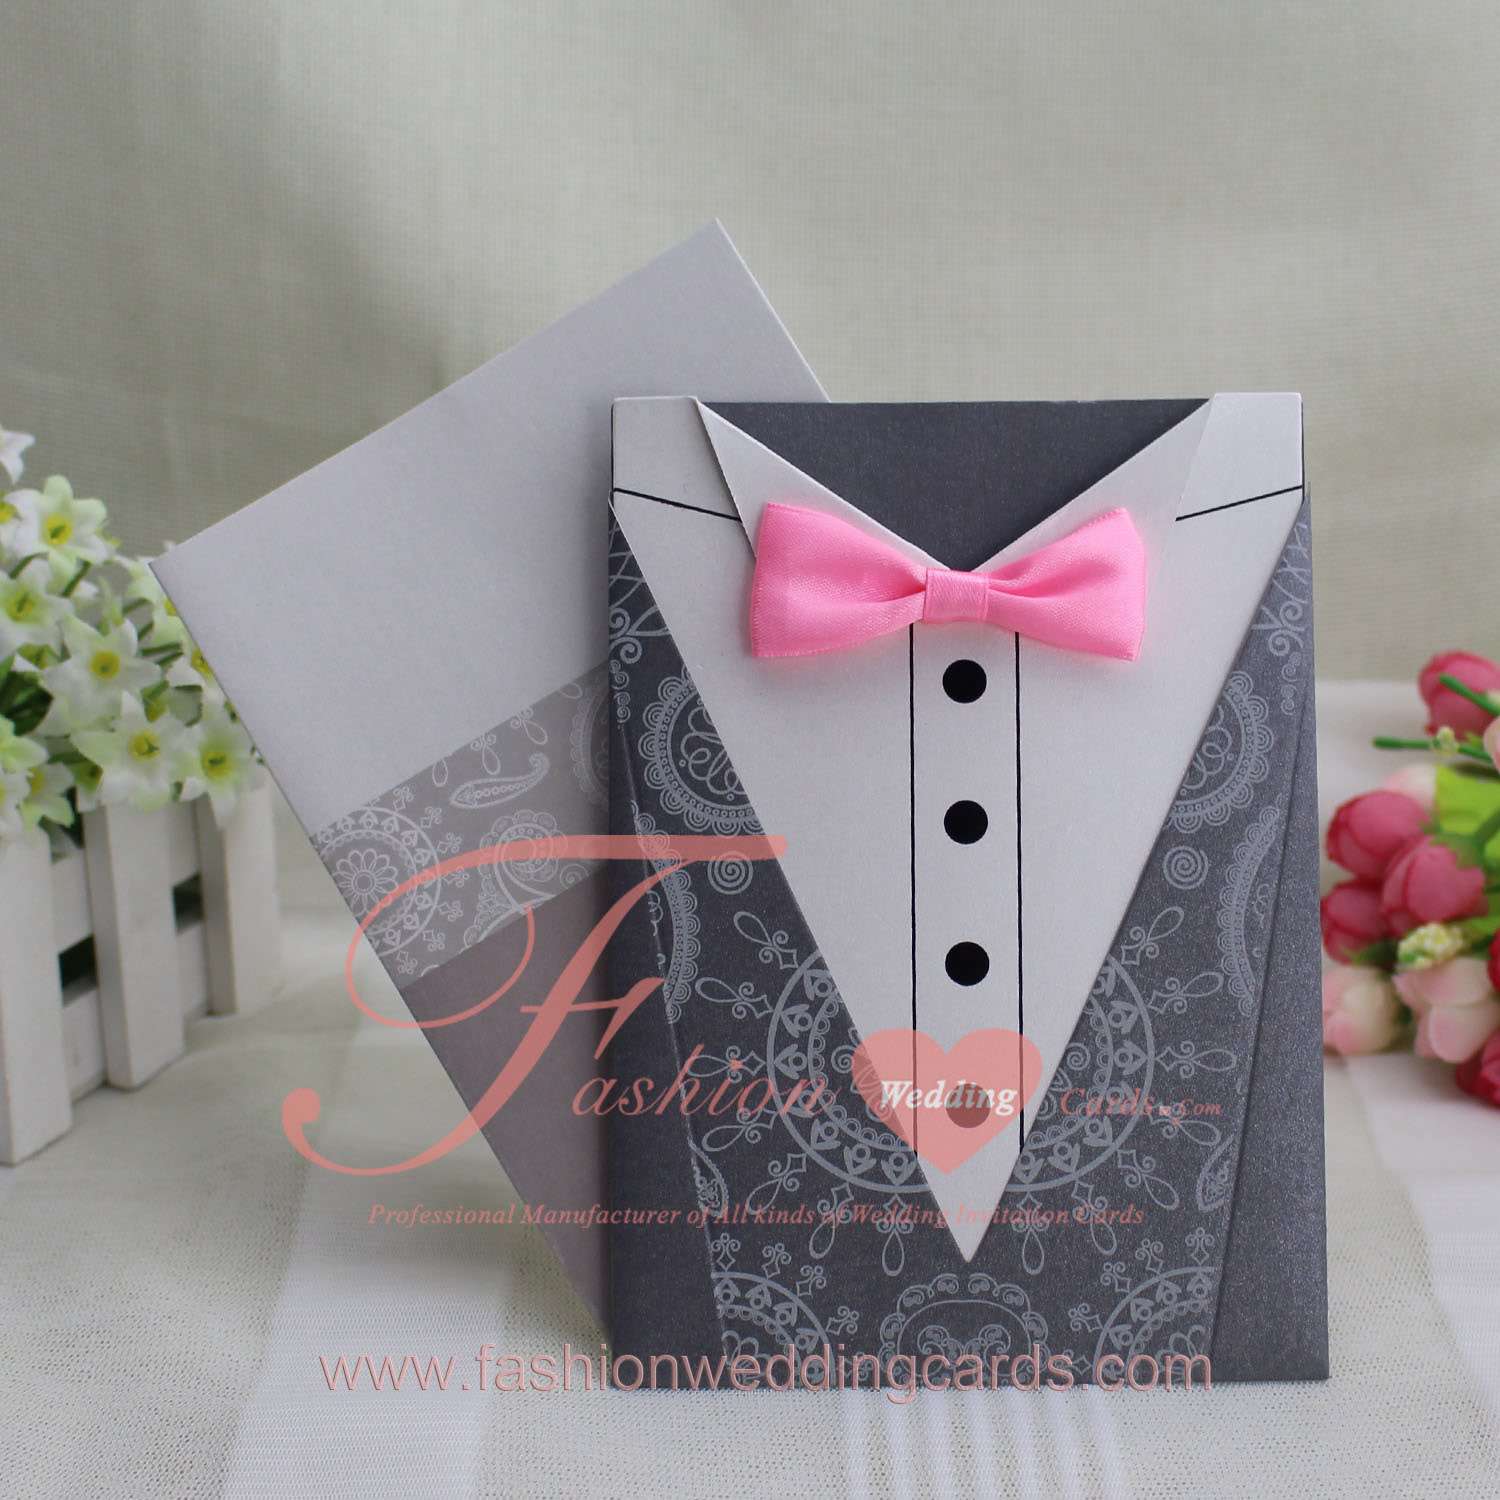 Print Your Own Wedding Invitations Free